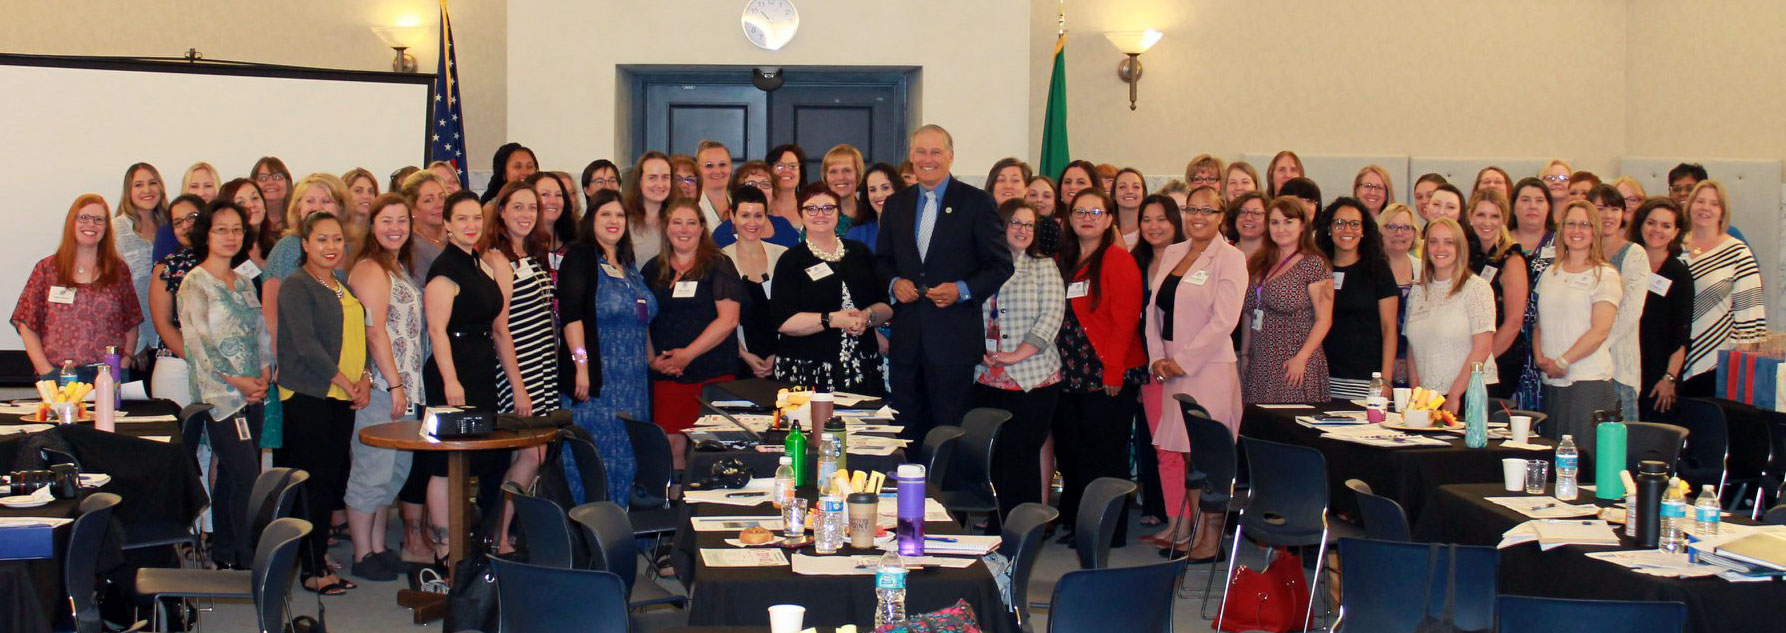 Governor Jay Inslee (center) poses with ICSEW representatives at the 2018 Transition Celebration in Olympia.